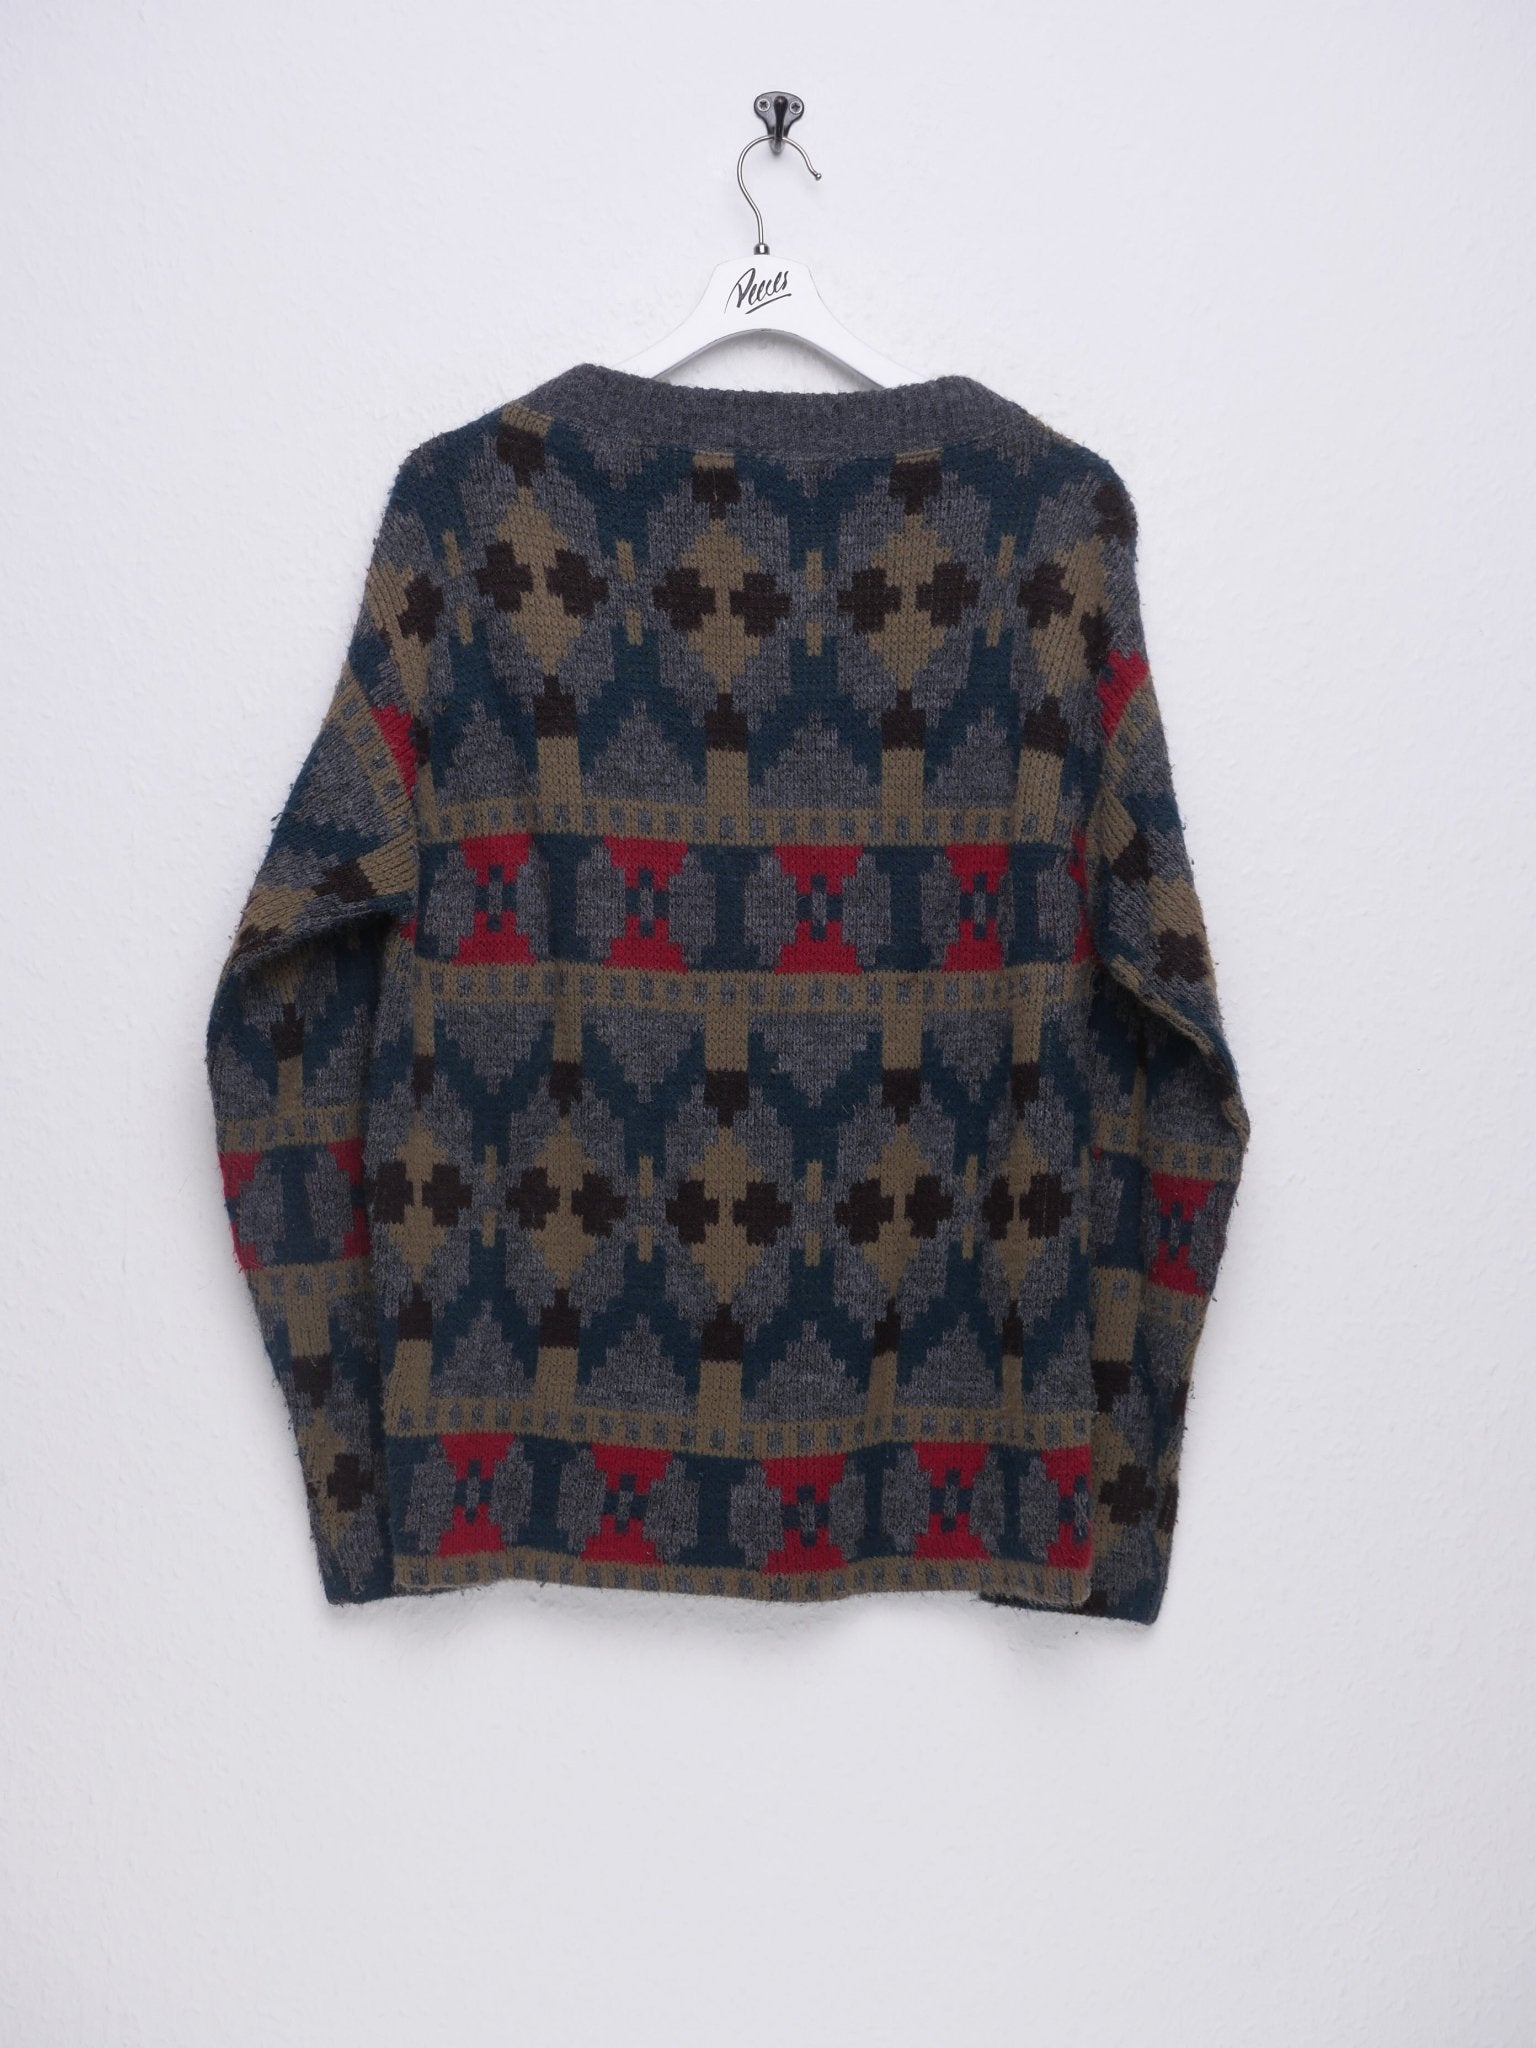 patterned Knit Sweater - Peeces